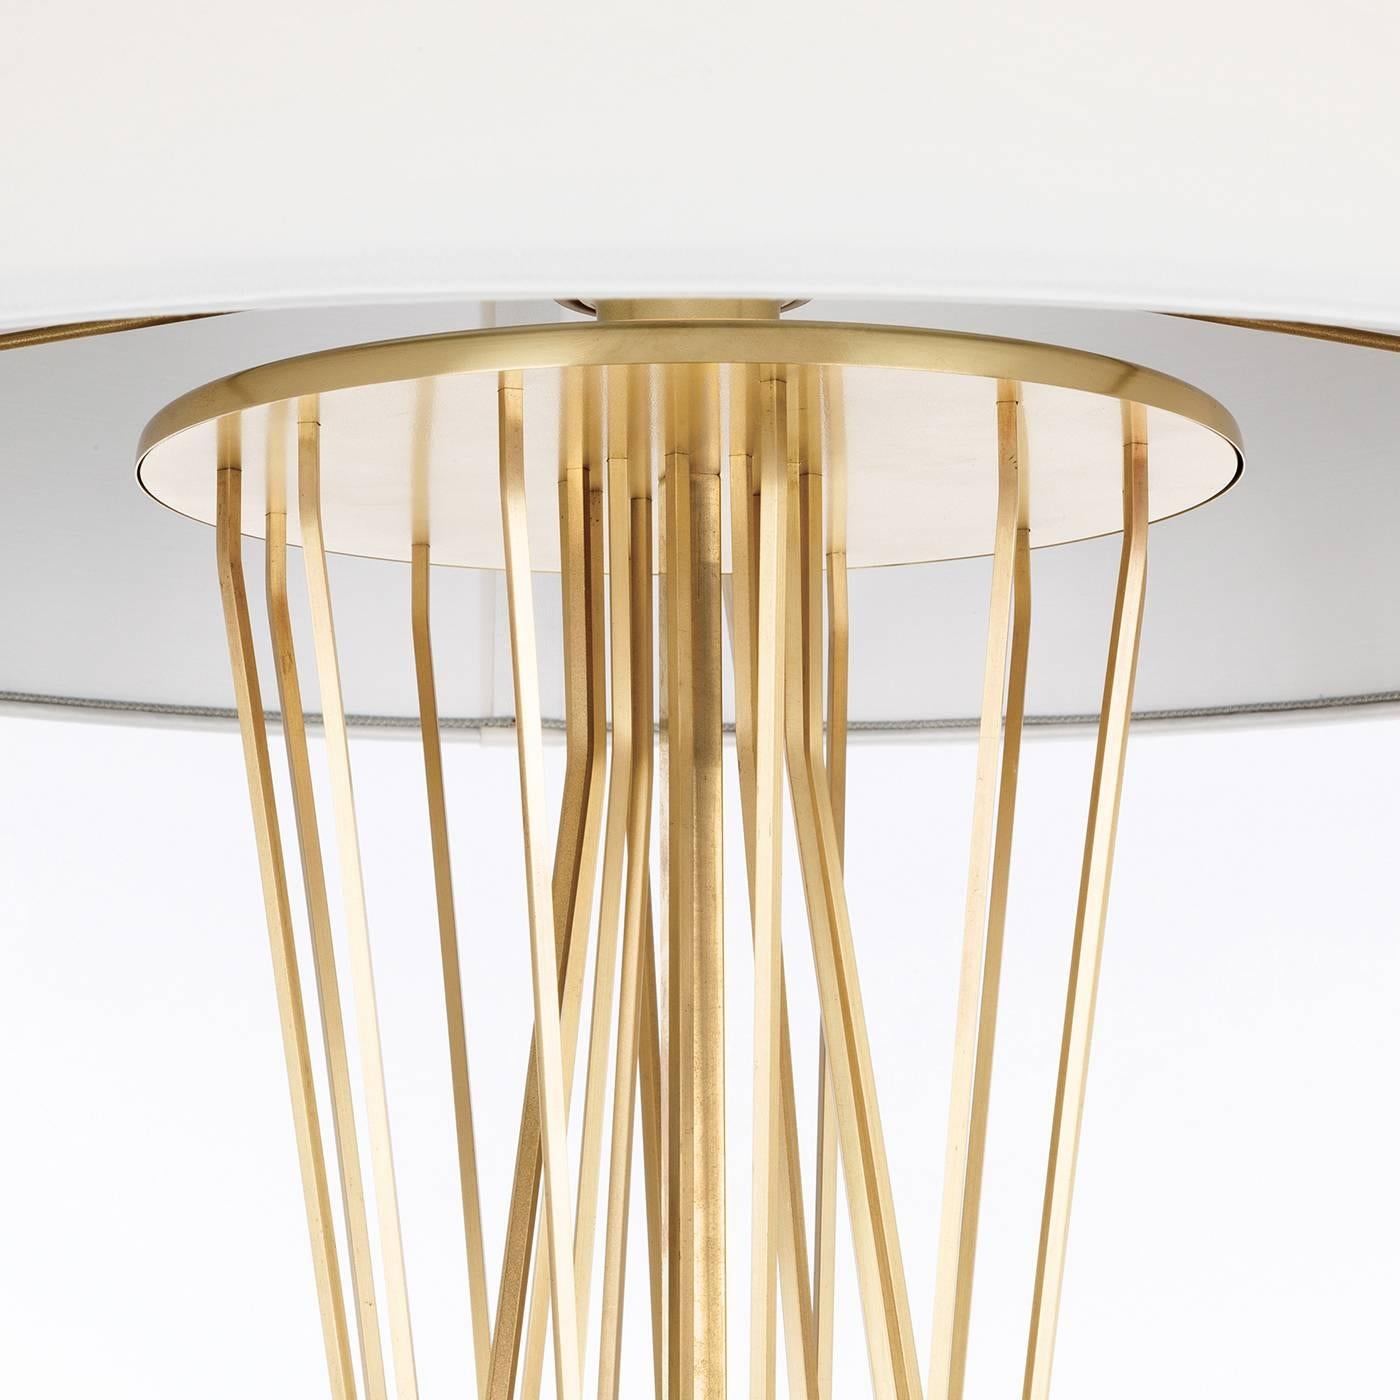 This magnificent table lamp is part of the Saba collection and features a square base in bronzed brass supporting a sculptural vertical element made up of several brass rods, bent at different angles that intersect to create a dynamic and airy